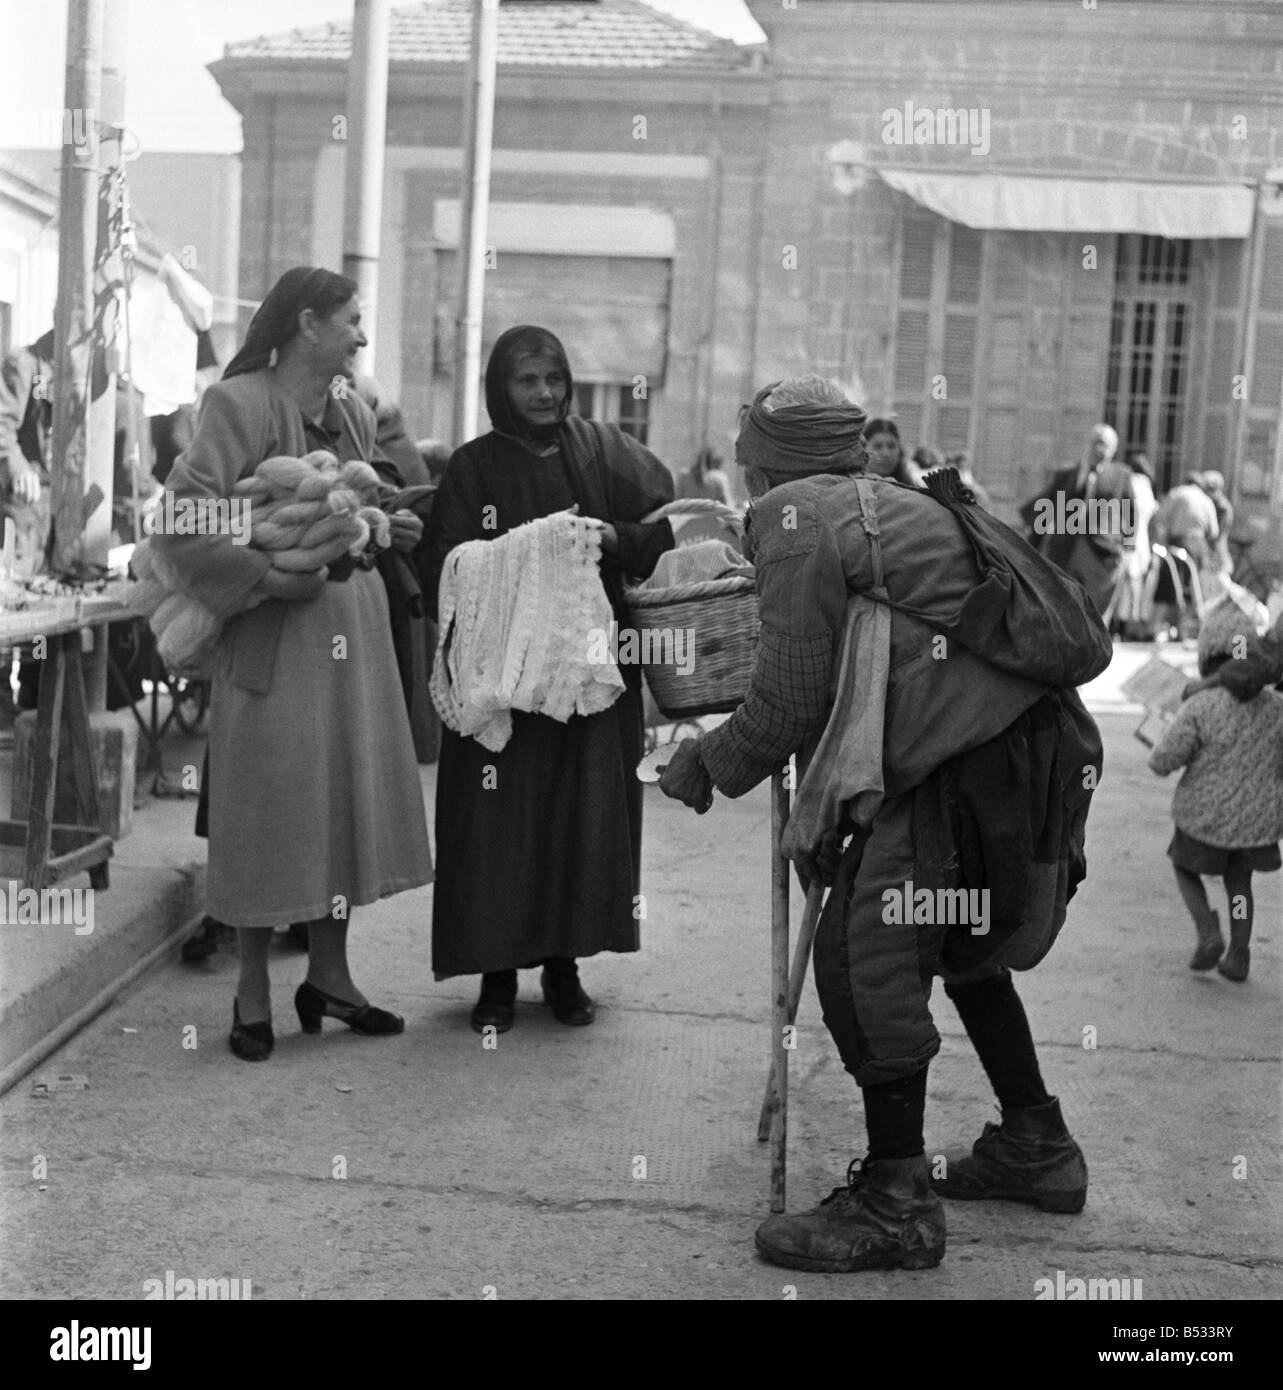 Traders at the Ladies Bazaar which opens every Friday in Nicosia, Cyprus,. The market sells items as diverse as lace, silk, embroideries, fruit and food. Our picture shows: A beggar approaching two women out shopping. November 1952 C1105-005 Stock Photo